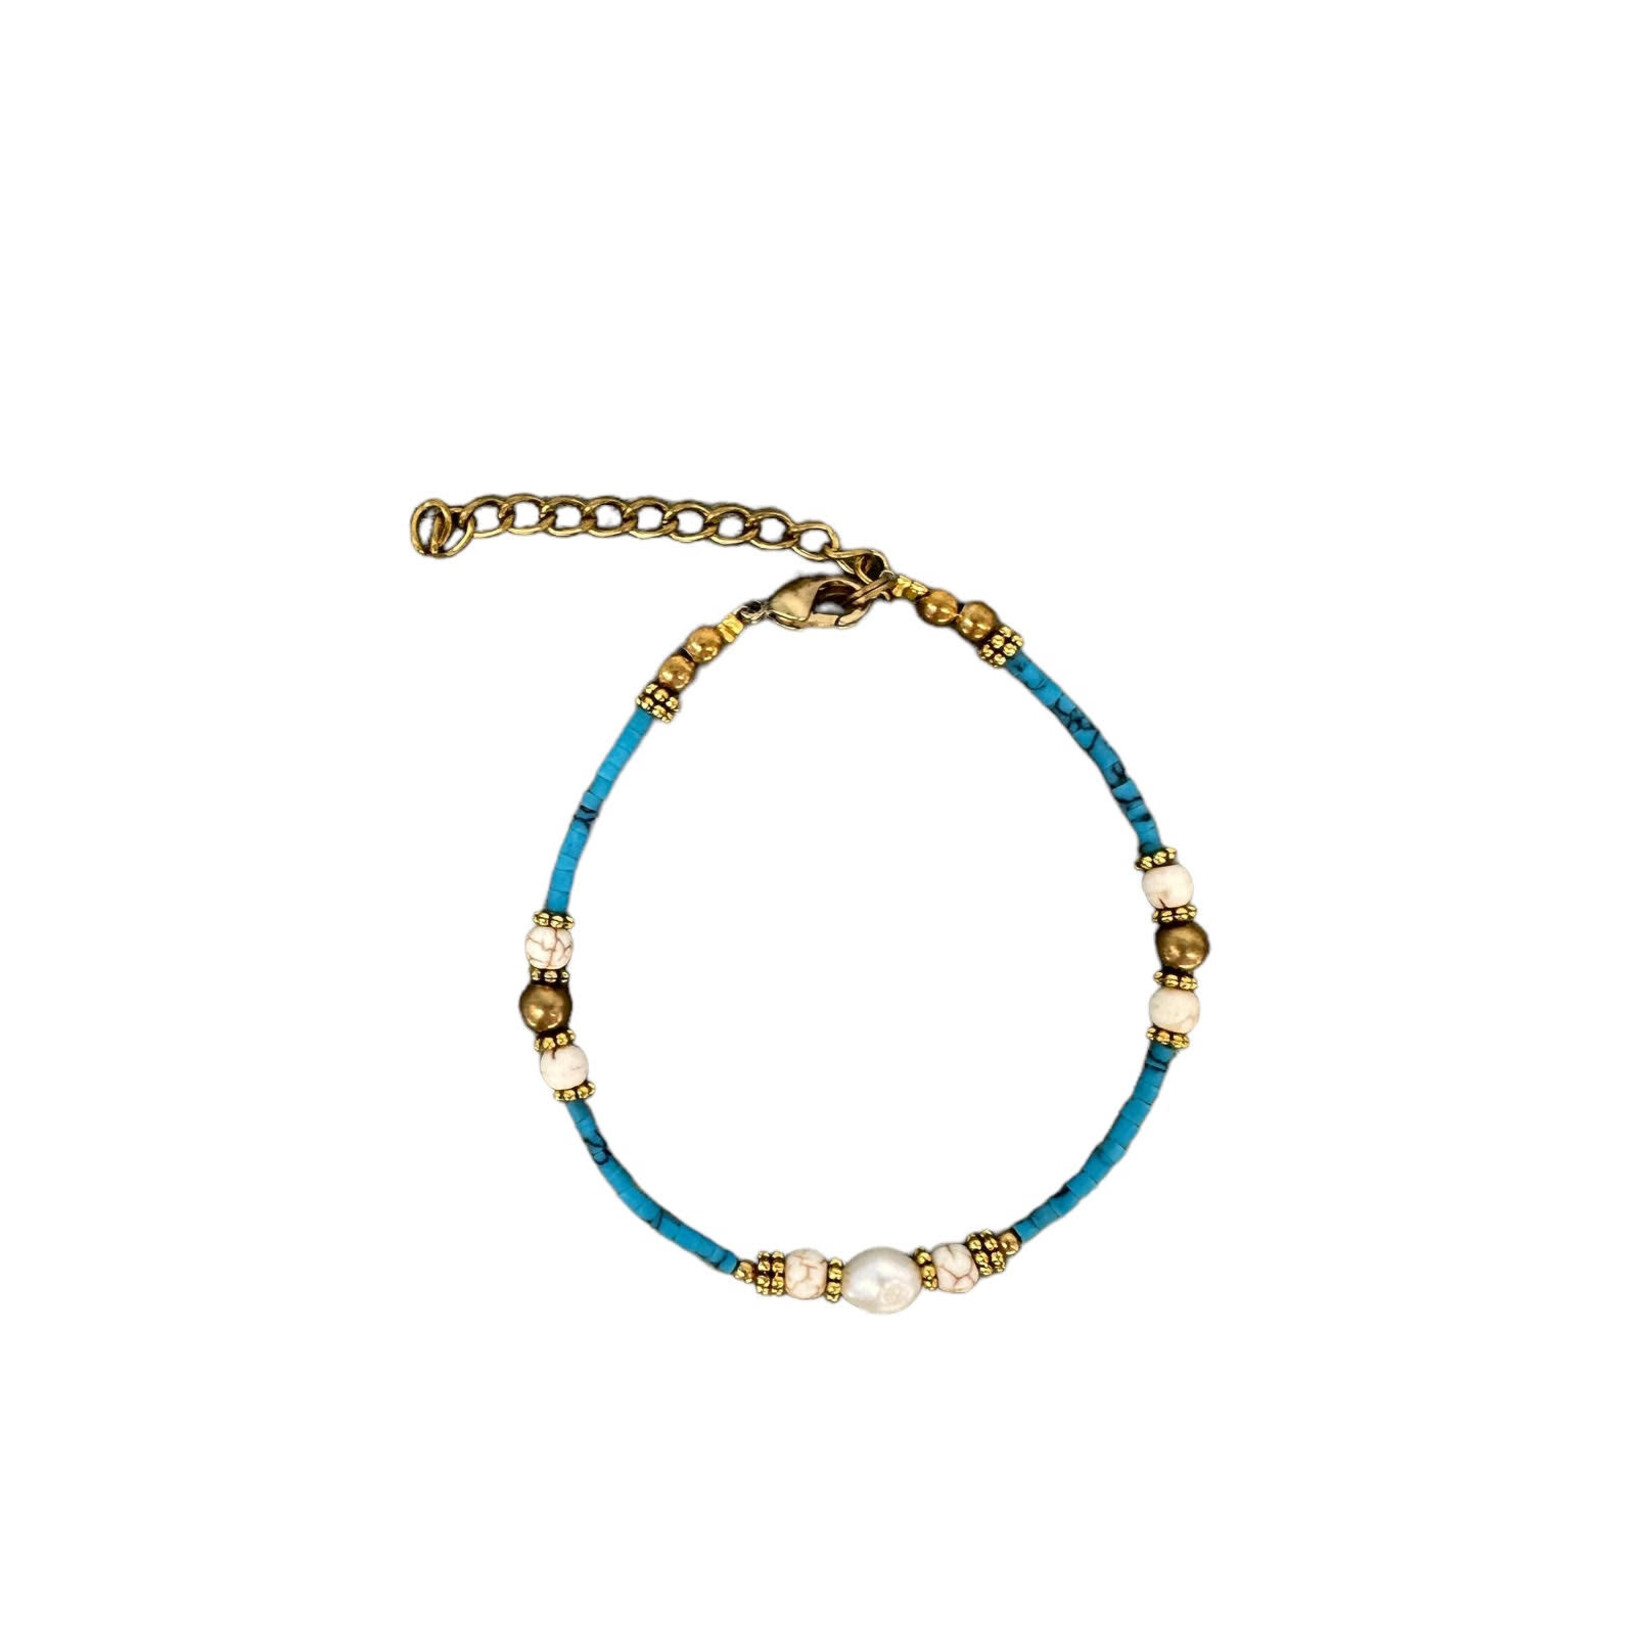 Pearl and Howlite Gemstone, Clay and Brass Bead Adjustable Bracelet Light Blue BB49